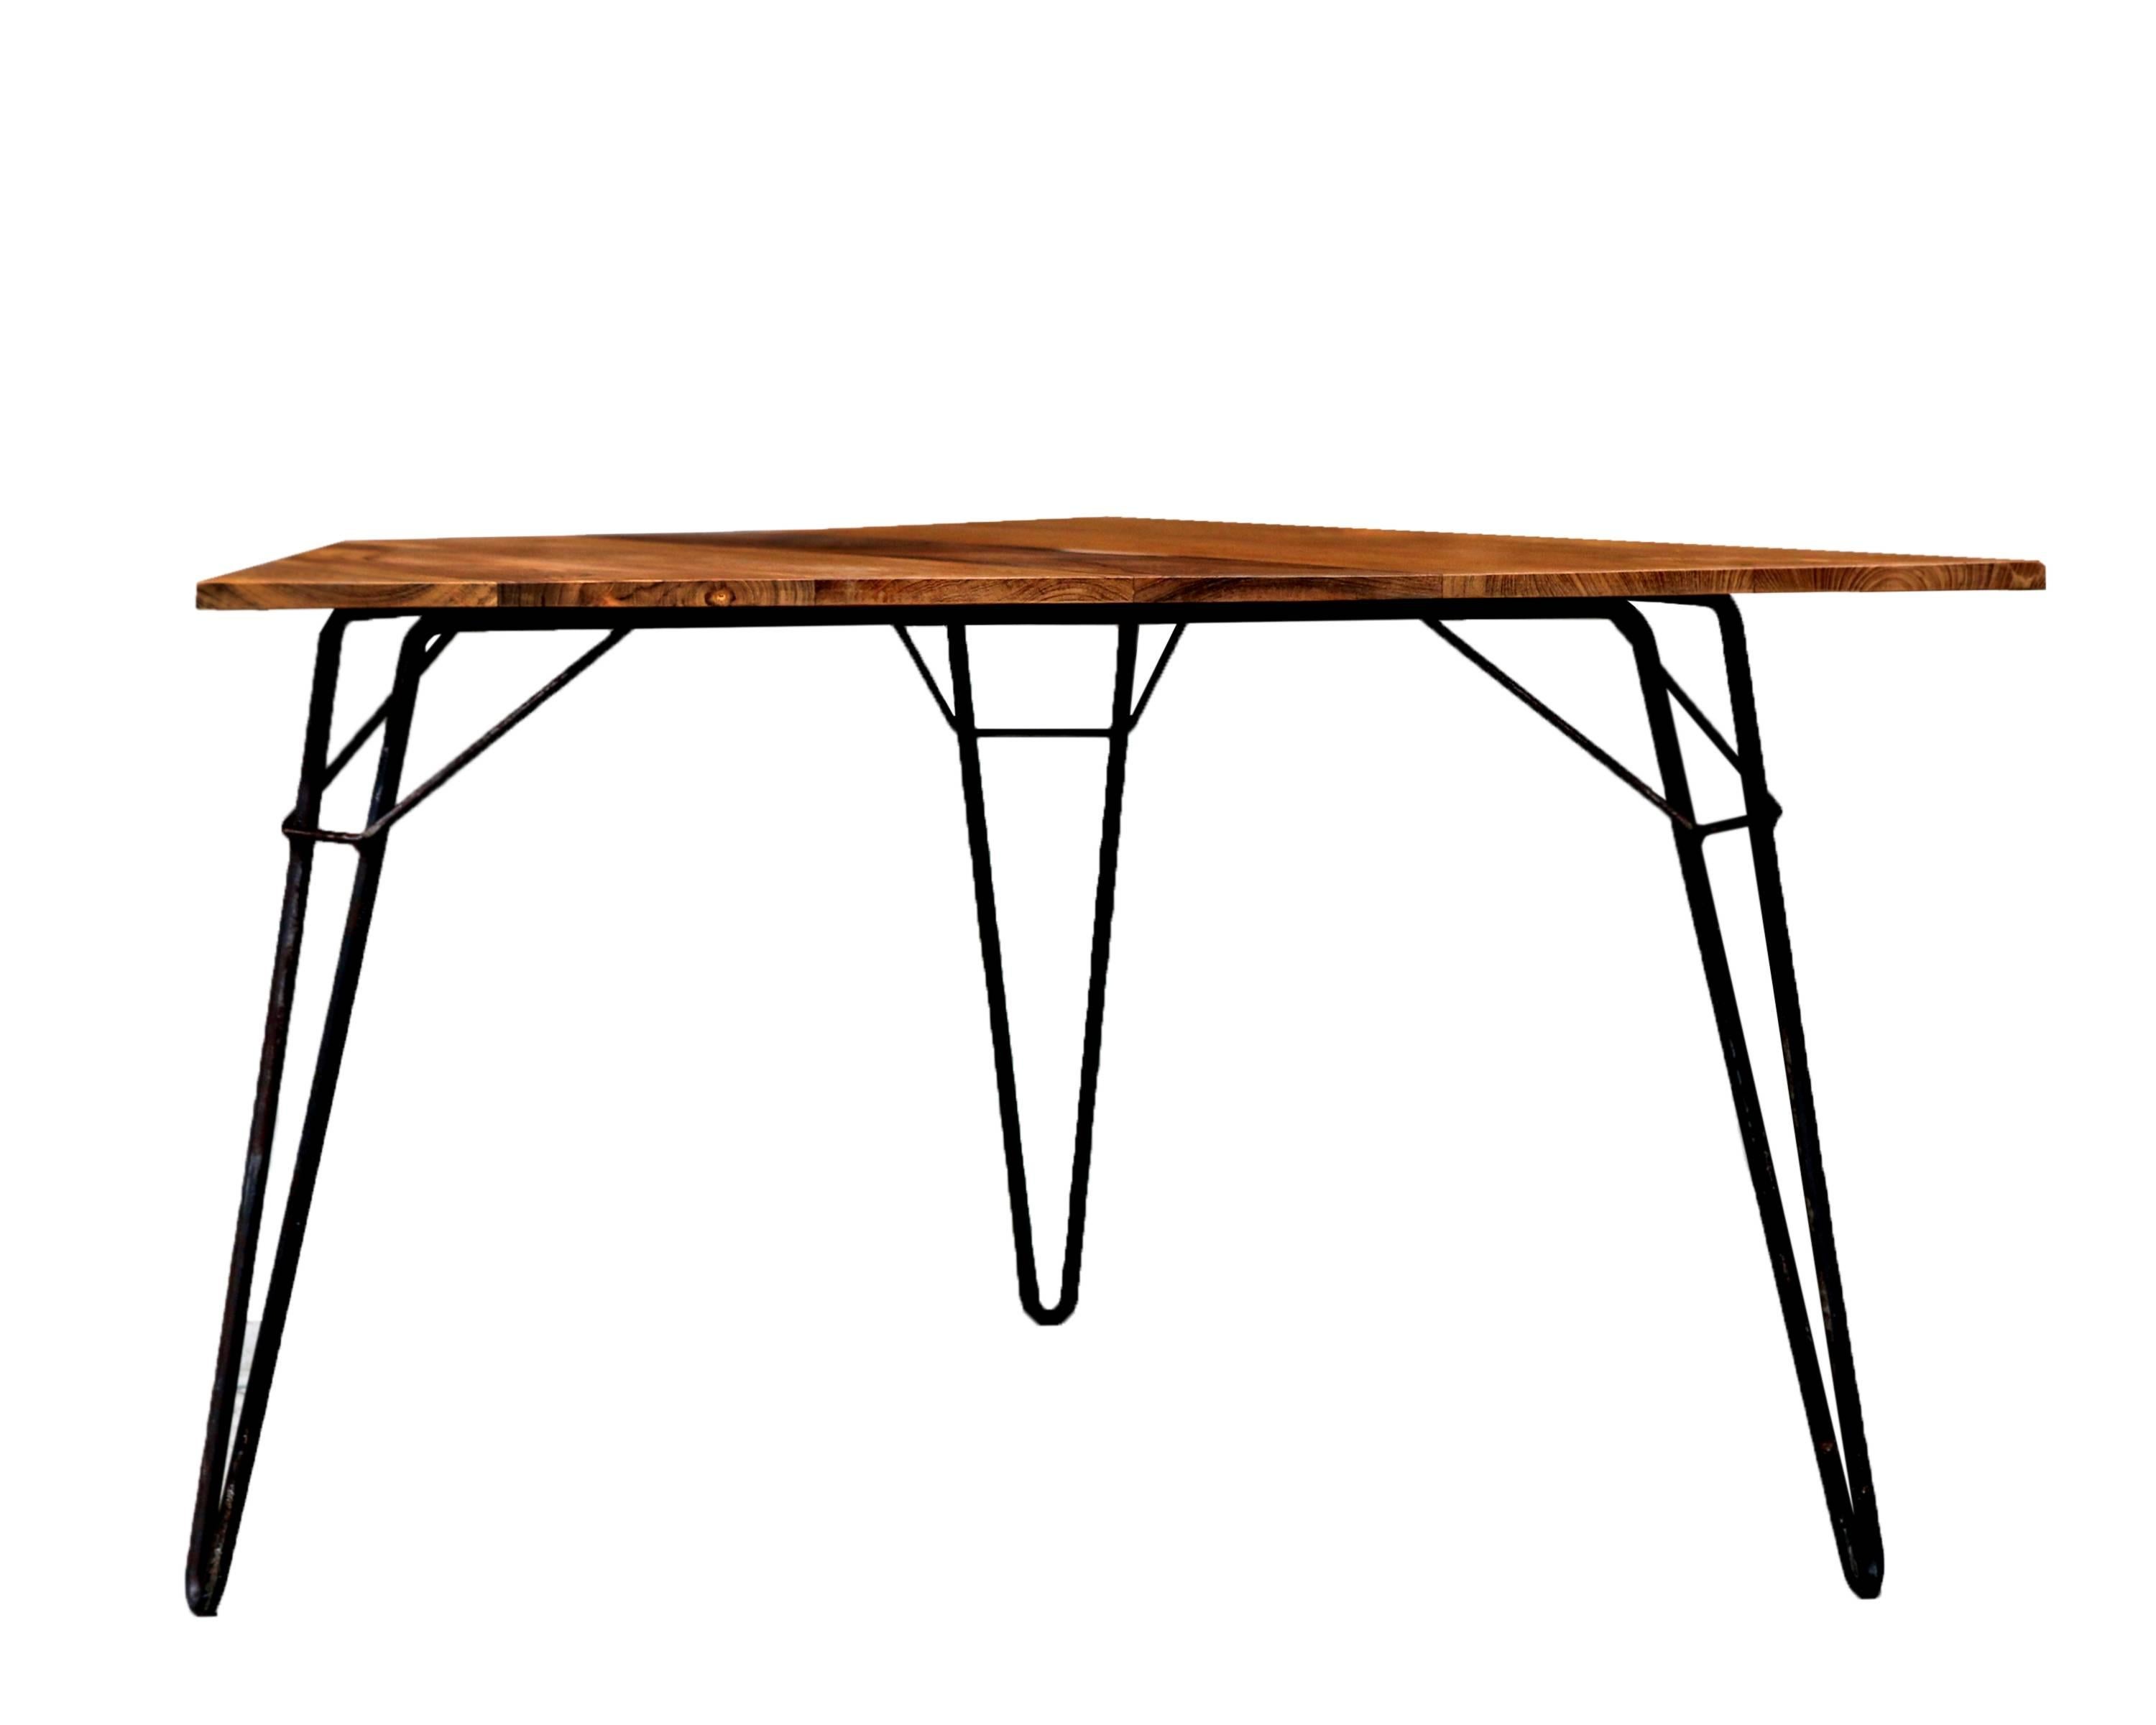 Very rare T1 kitchen or office table, with a solid vintage wooden top. Very nice patina. It is one of the best designs by Willy Van Der Meeren Belgian Architect and designer. We have six matching tables available. This listing is for one table.
The